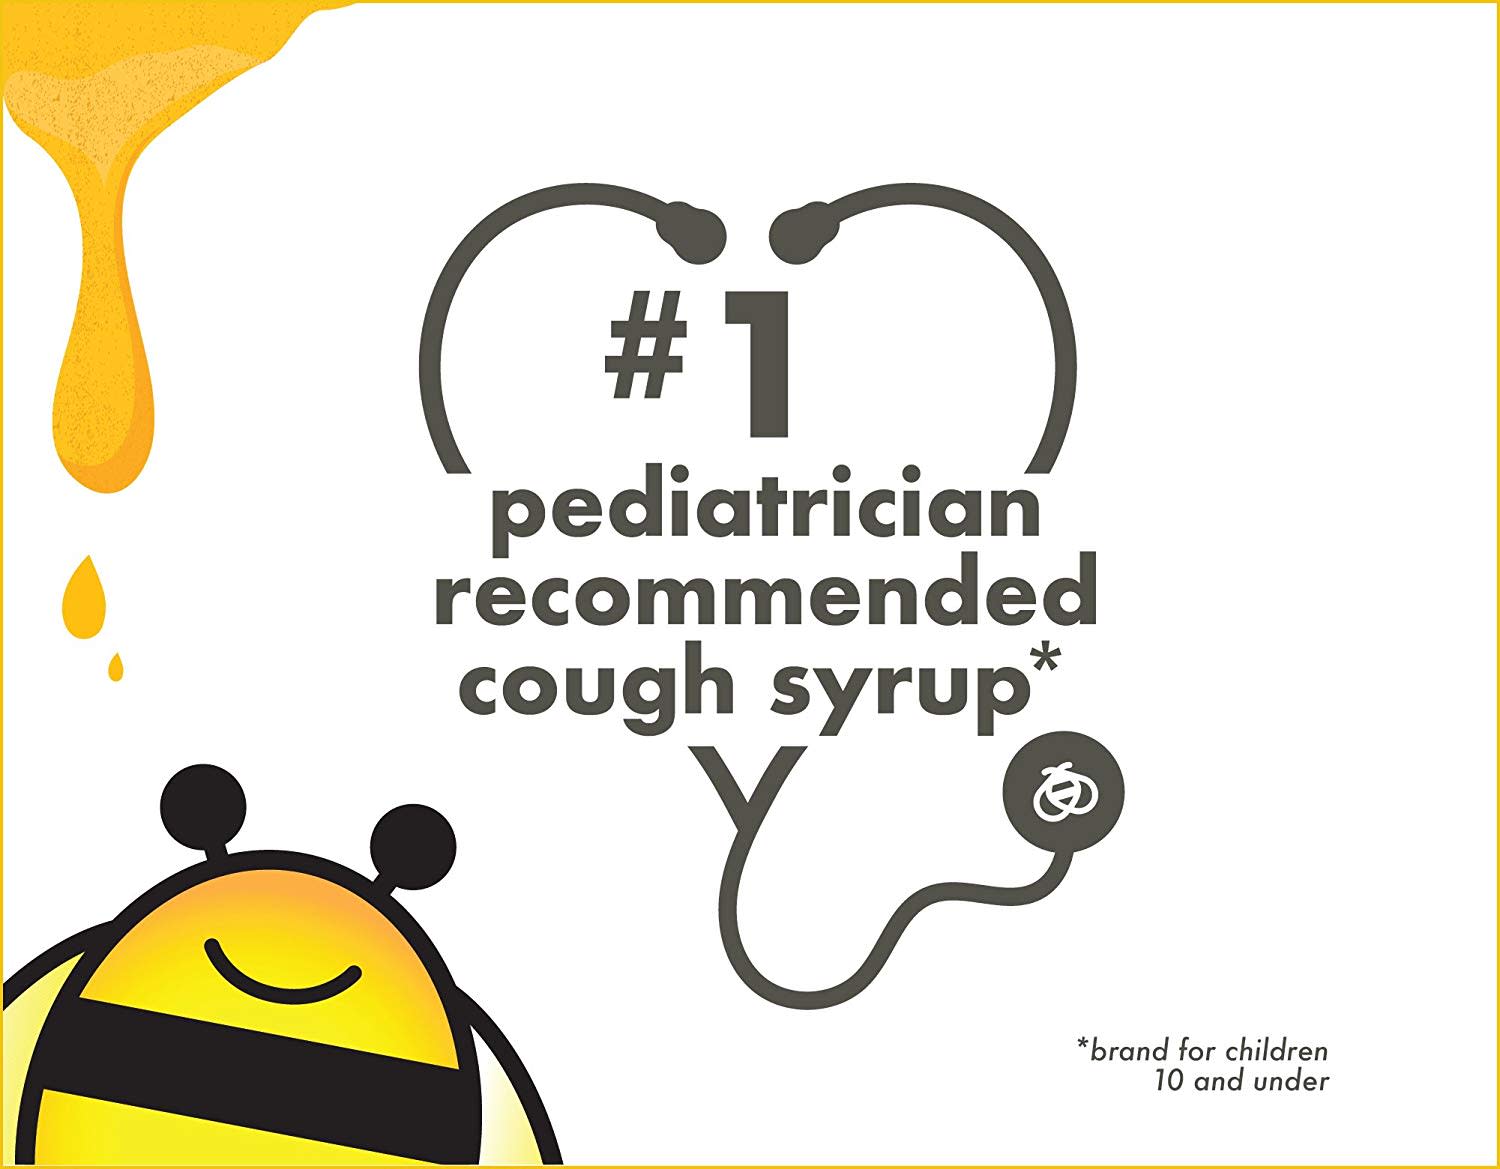 Zarbee's Naturals Children's Cough Syrup + Mucus Nighttime, Grape, 4 fl oz - image 2 of 8